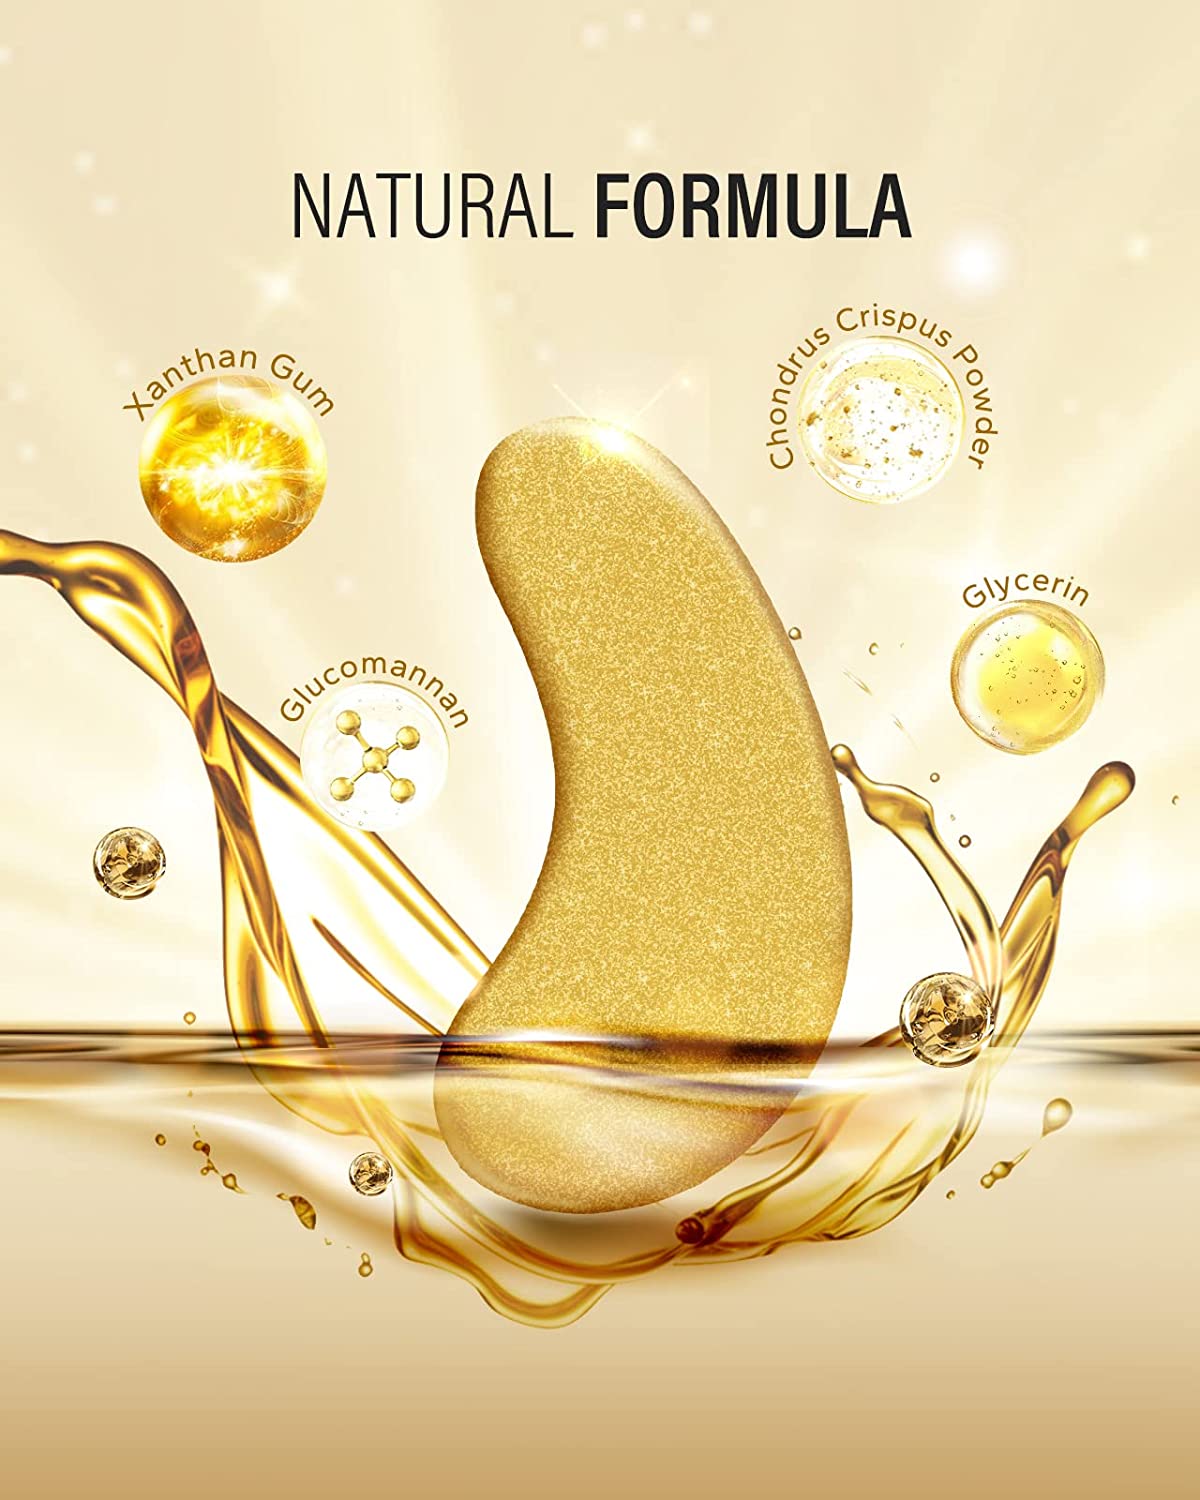 A single 24 karat gold eye mask which looks like it is splashing in gold colored water. The text says, 'Natural formula.'